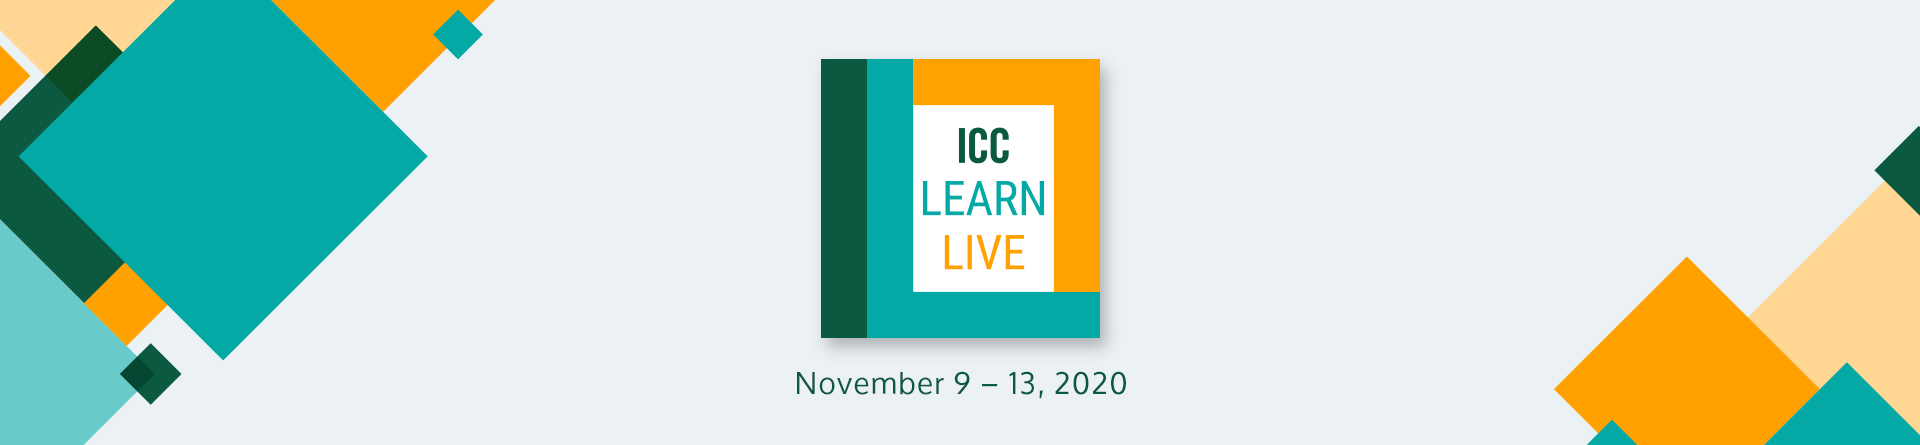 ICC Learn Live Schedule